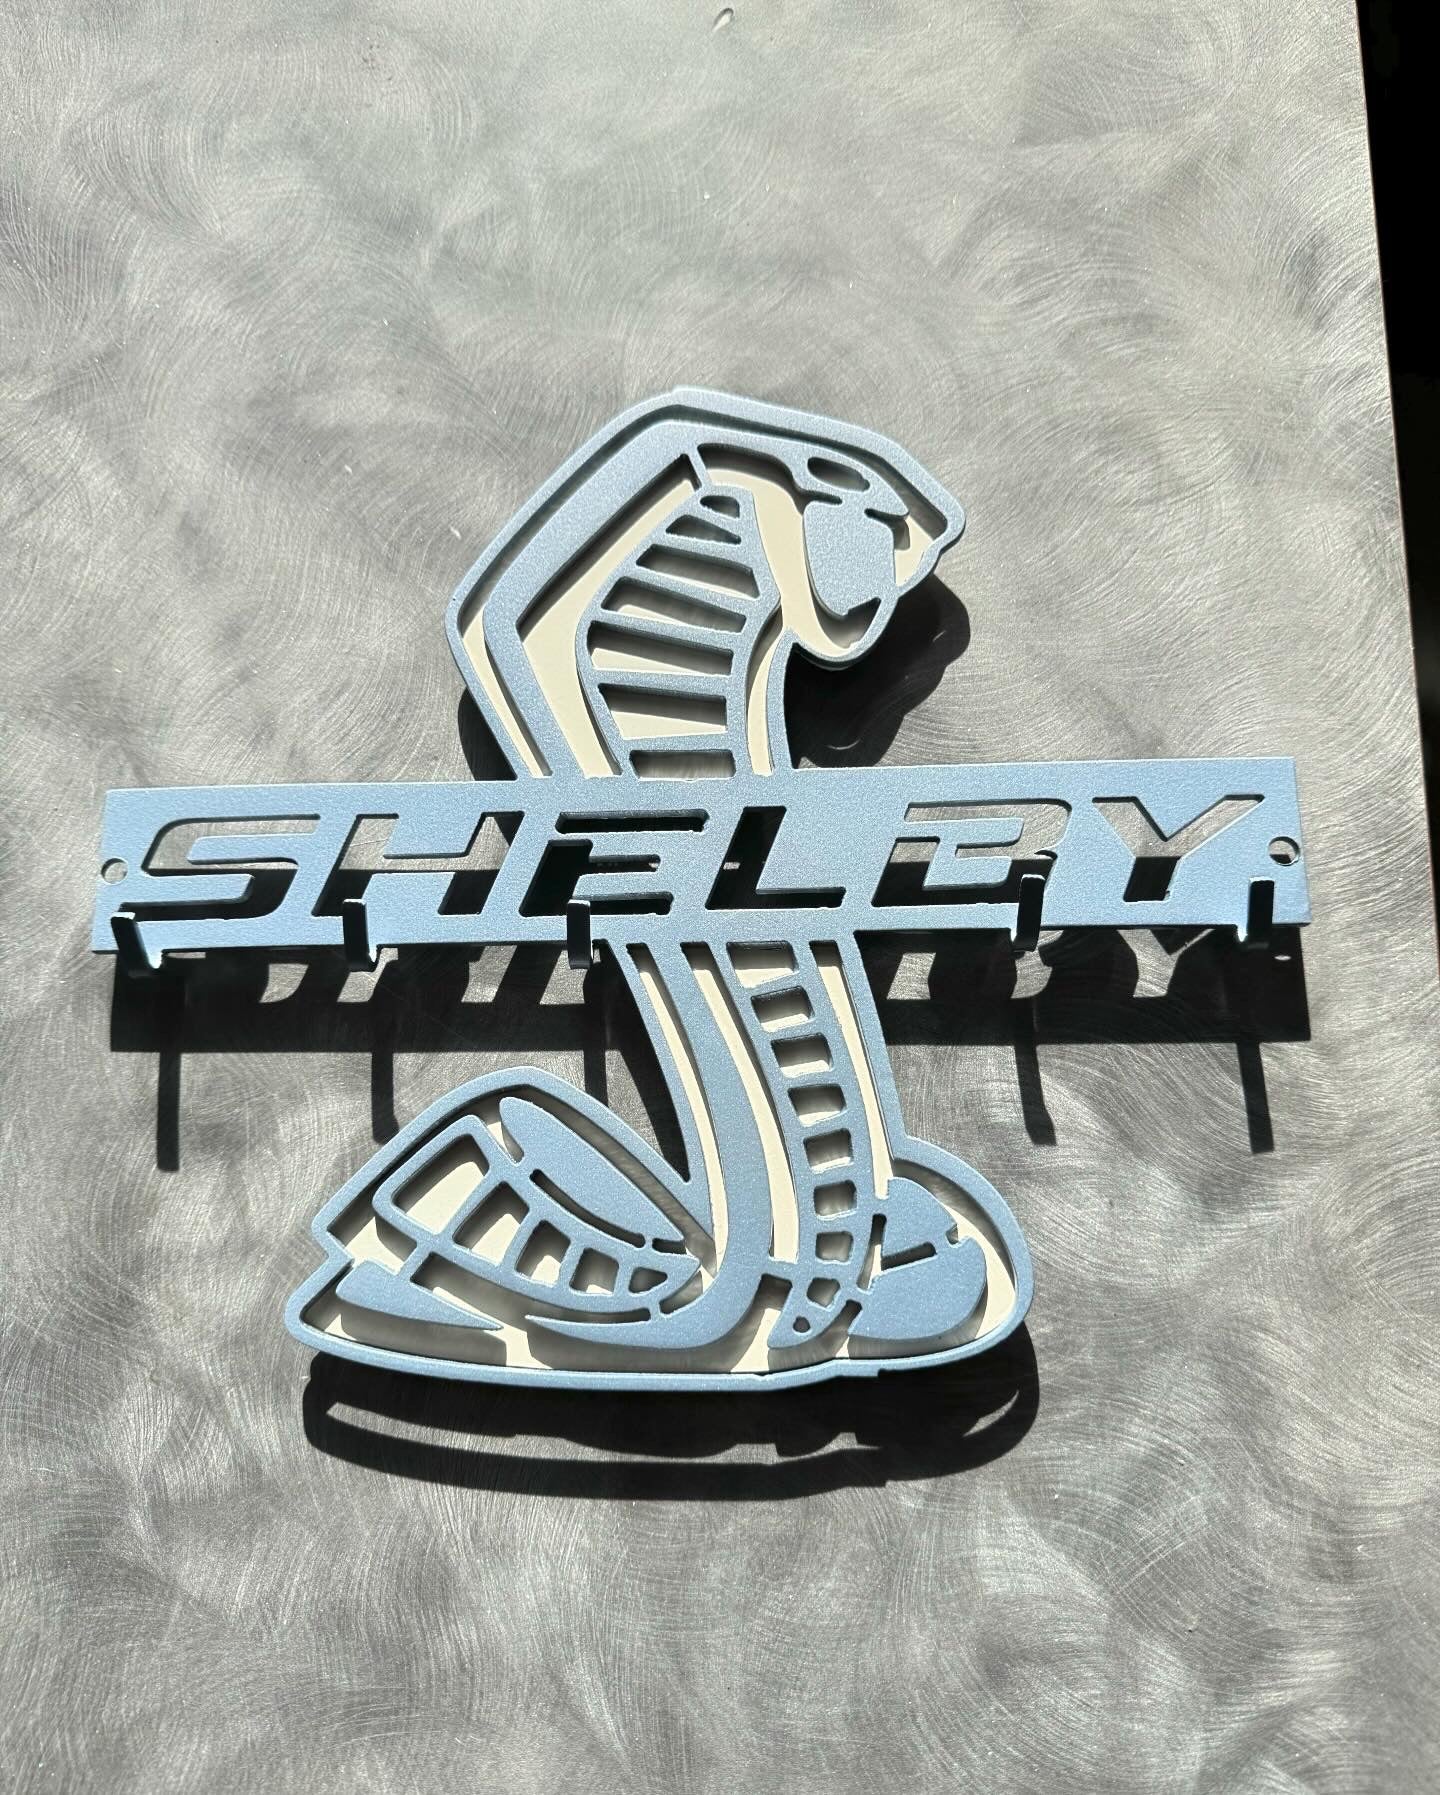 Shelby heritage edition key hanger